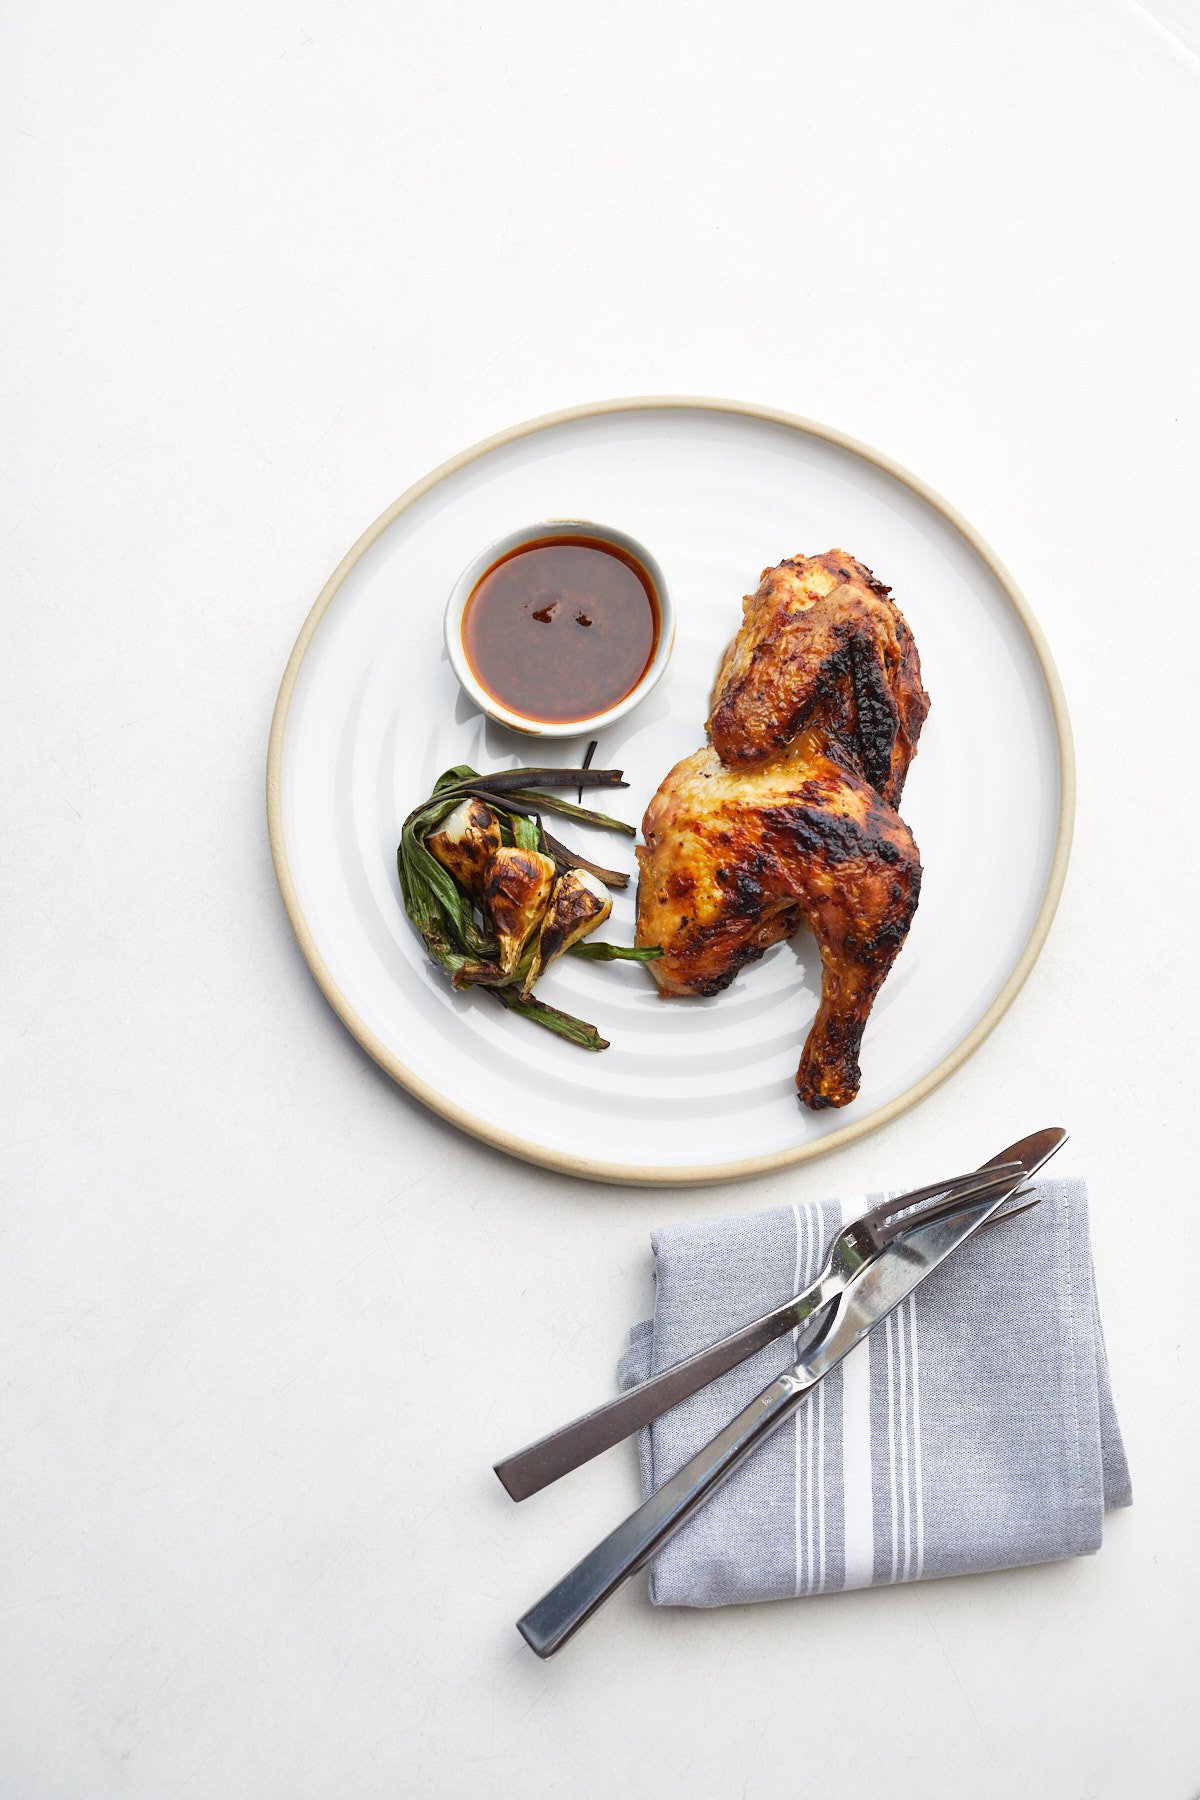 This shot by Jody Horton shows a simple plate of grilled chicken with sauce and grilled vegetables